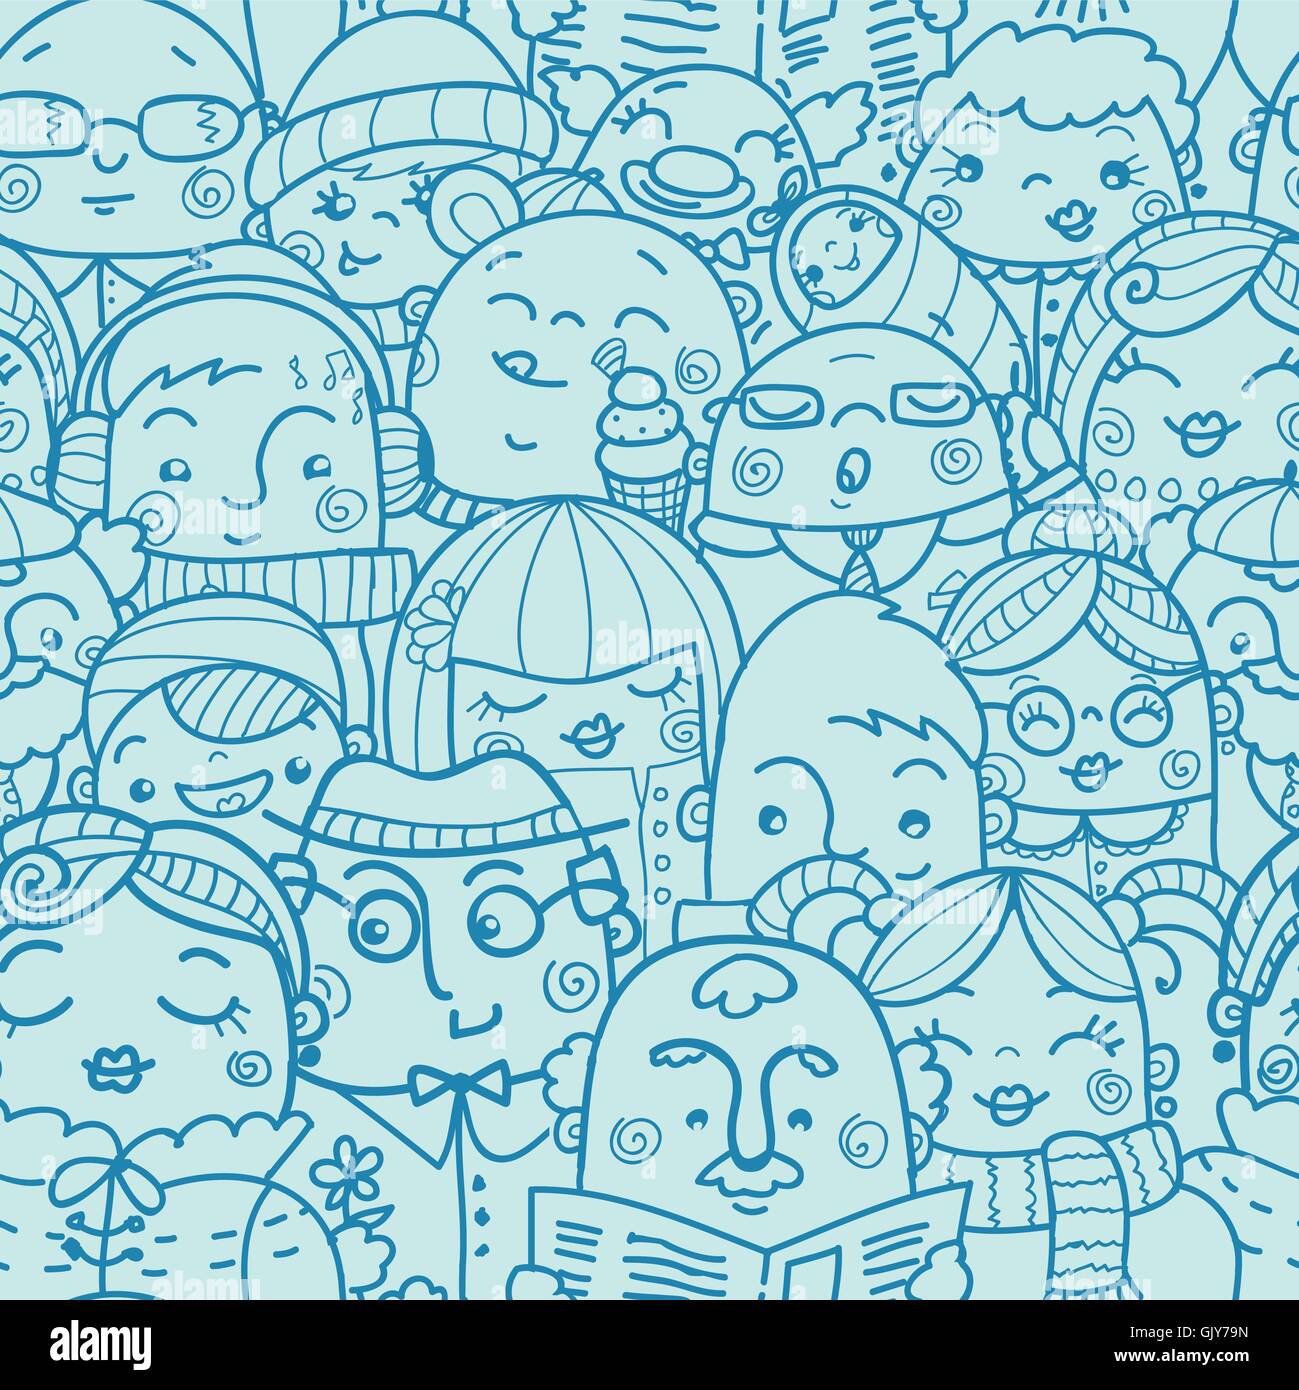 People in a crowd seamless pattern background Stock Vector